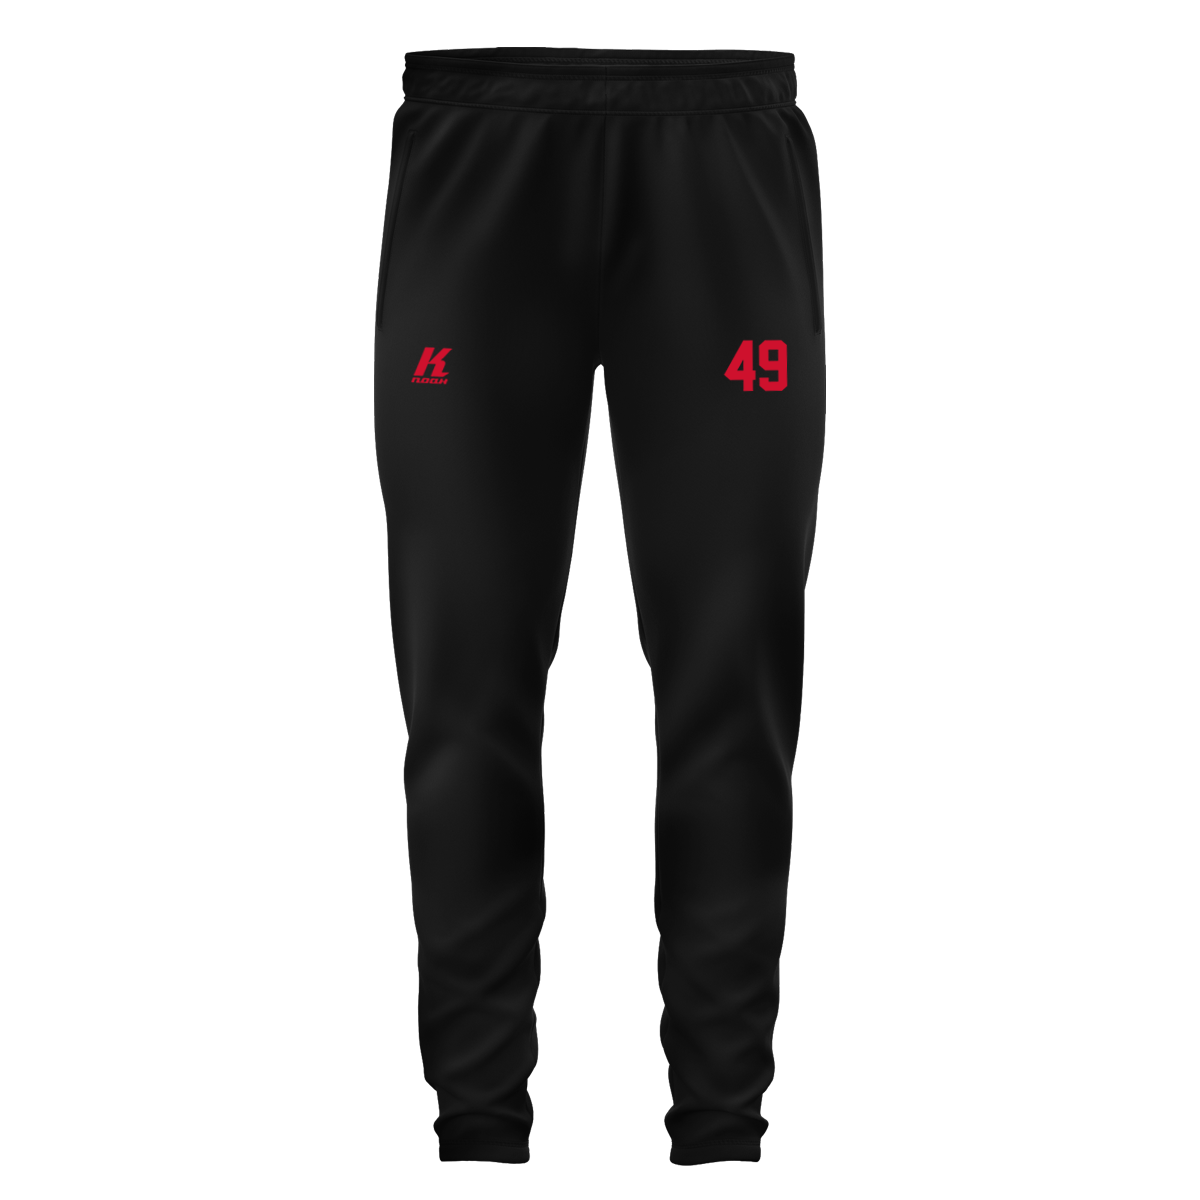 HCK Skinny Pant with Playernumber/Initials